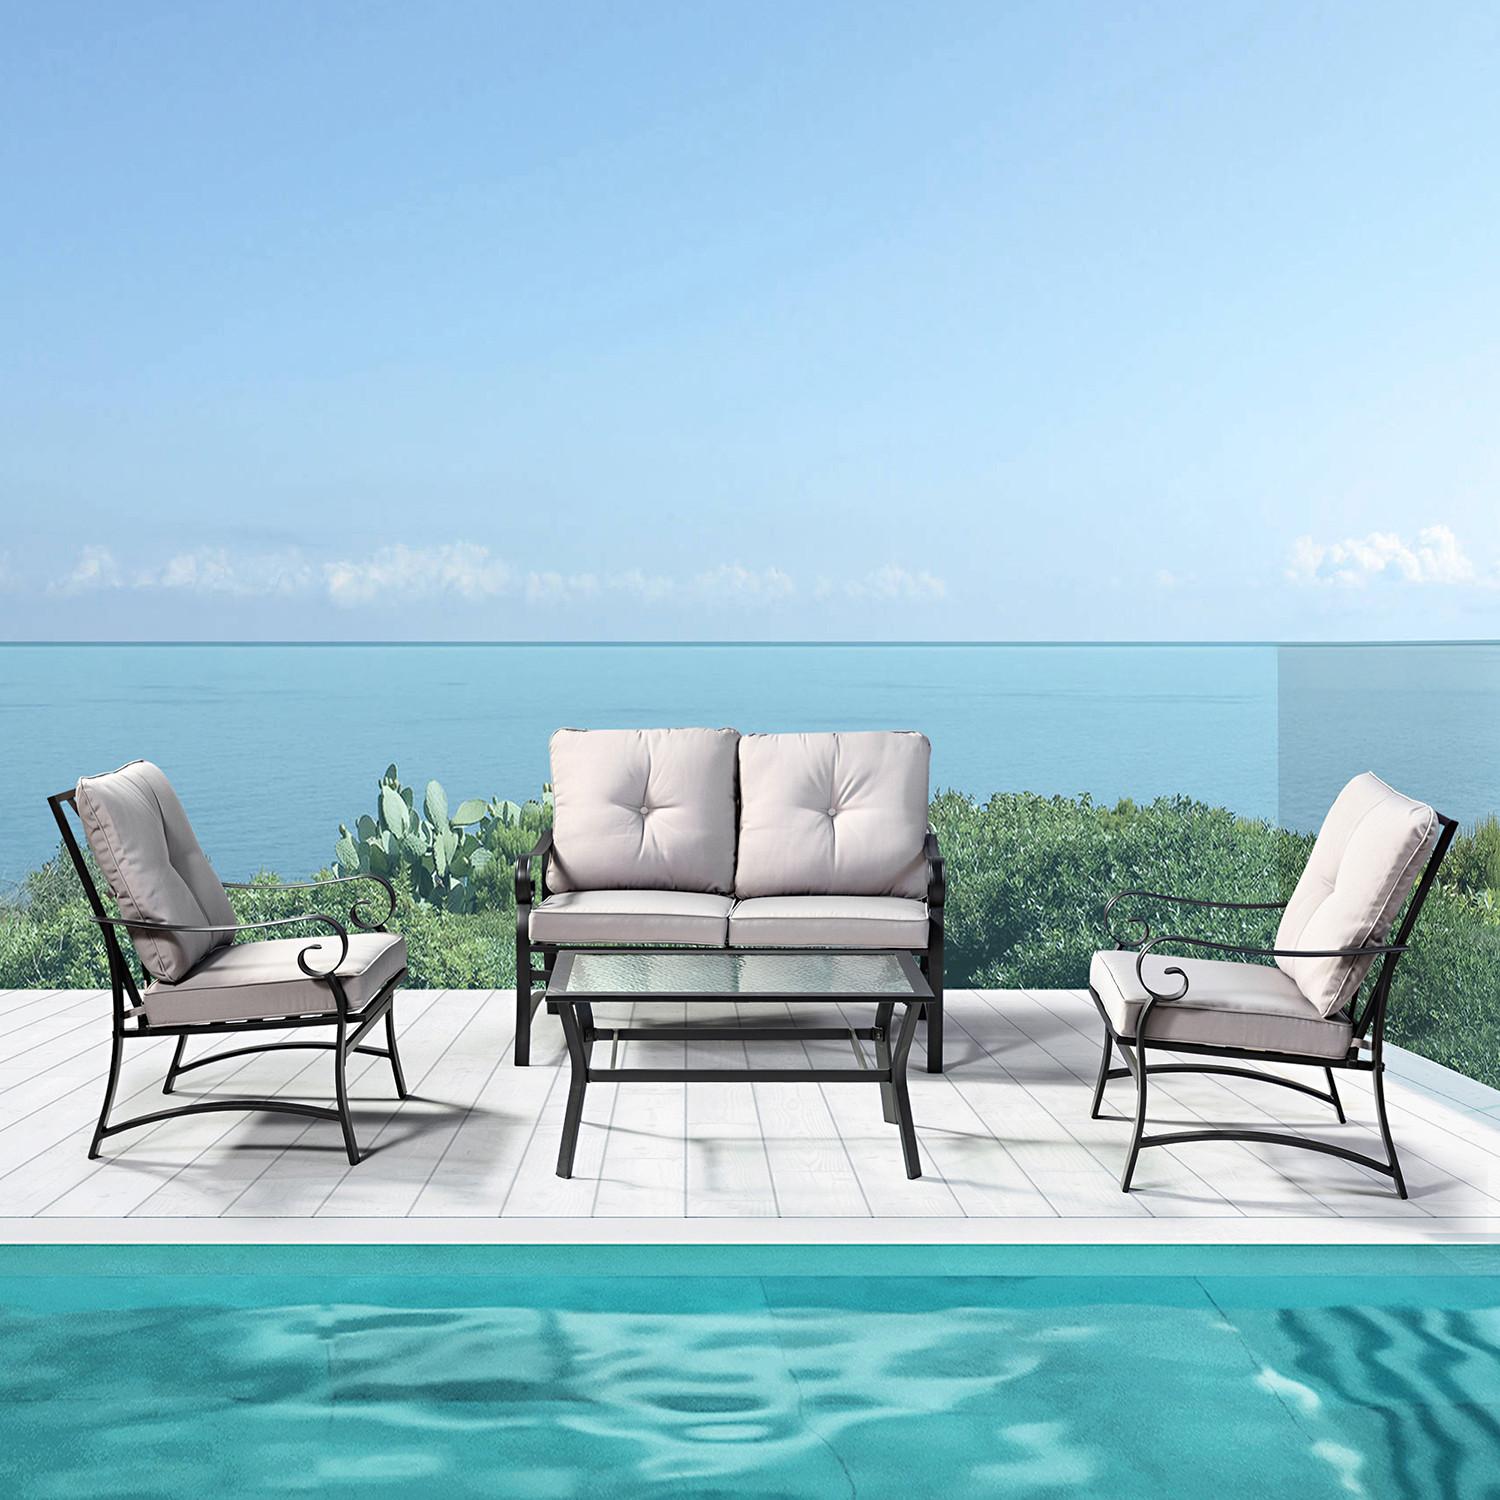 Iron Scroll Grey Outdoor Sofa Seating and Table Set